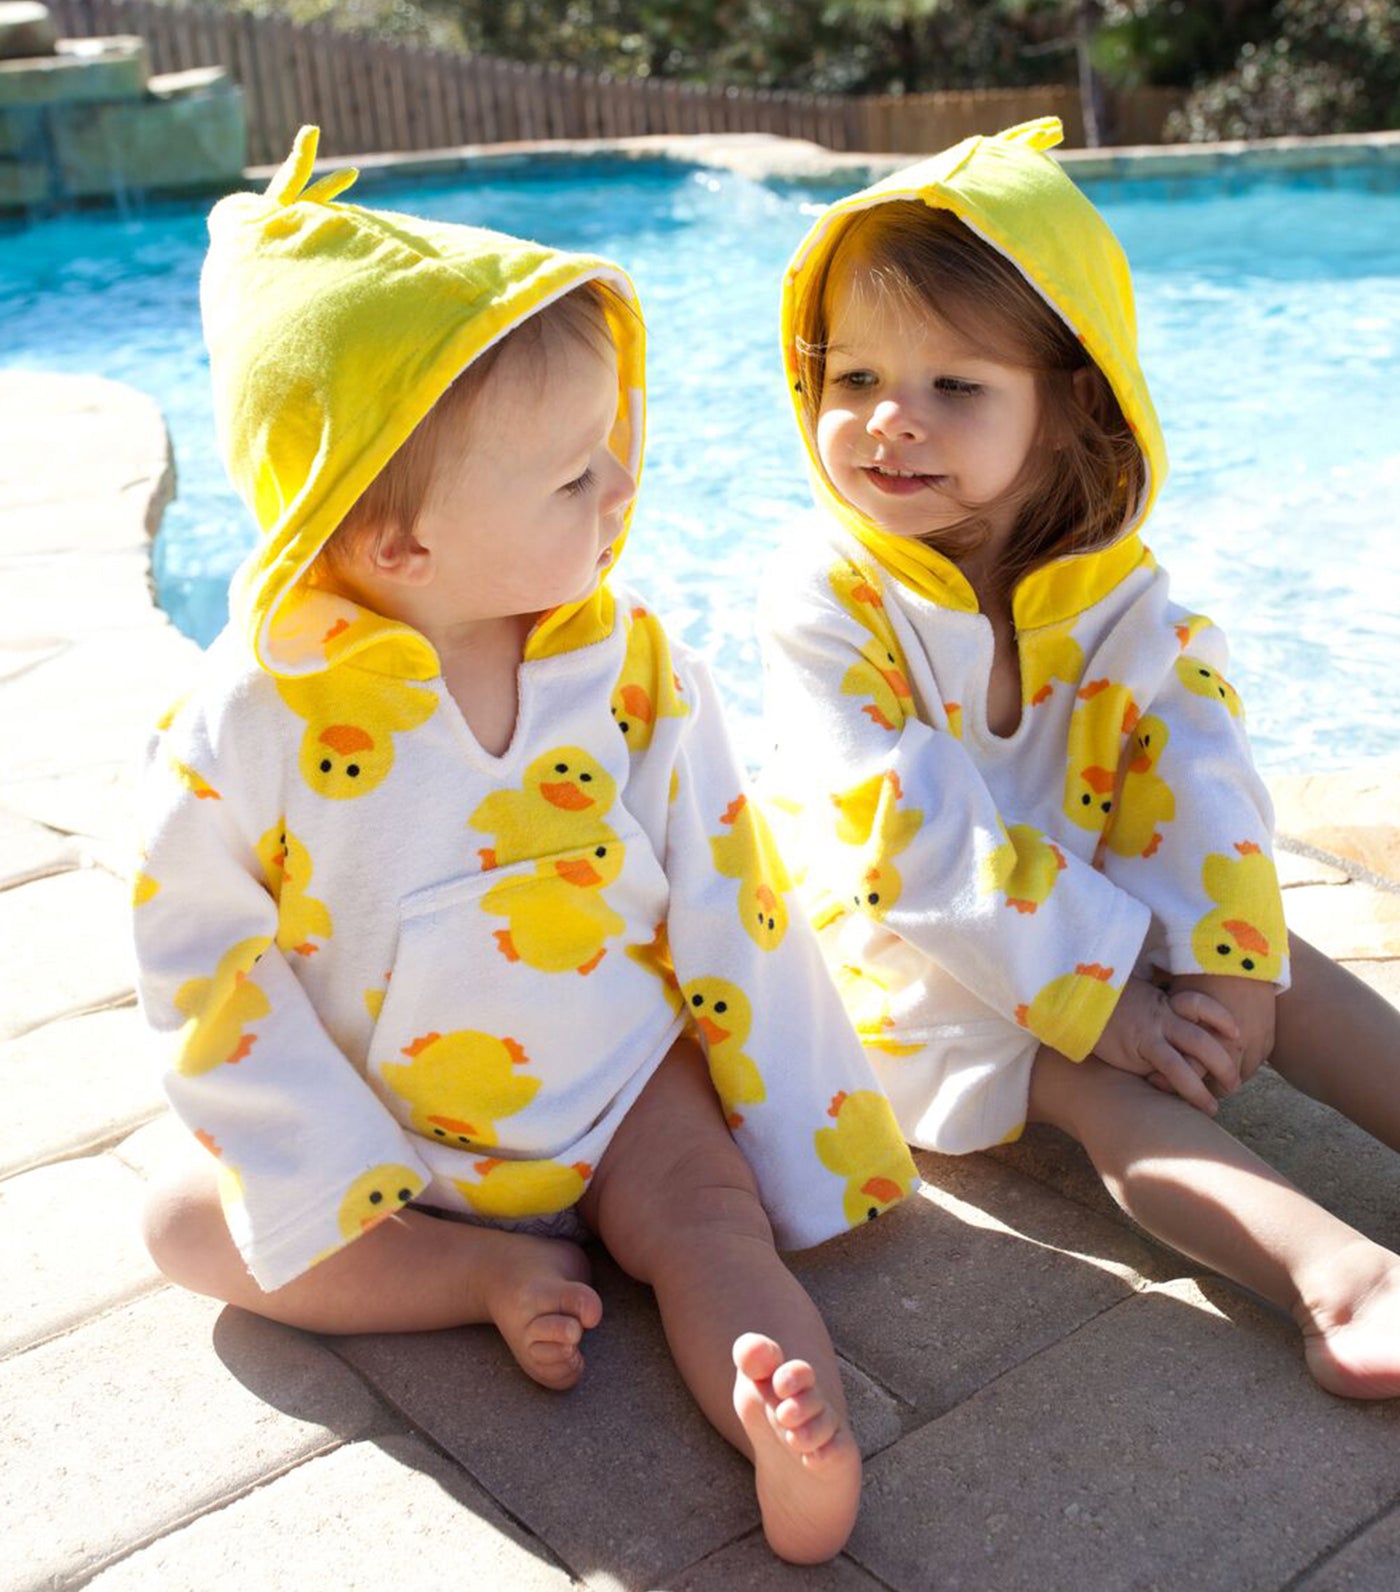 Zoocchini UPF50+ Swim Cover-Up - Puddles the Duck